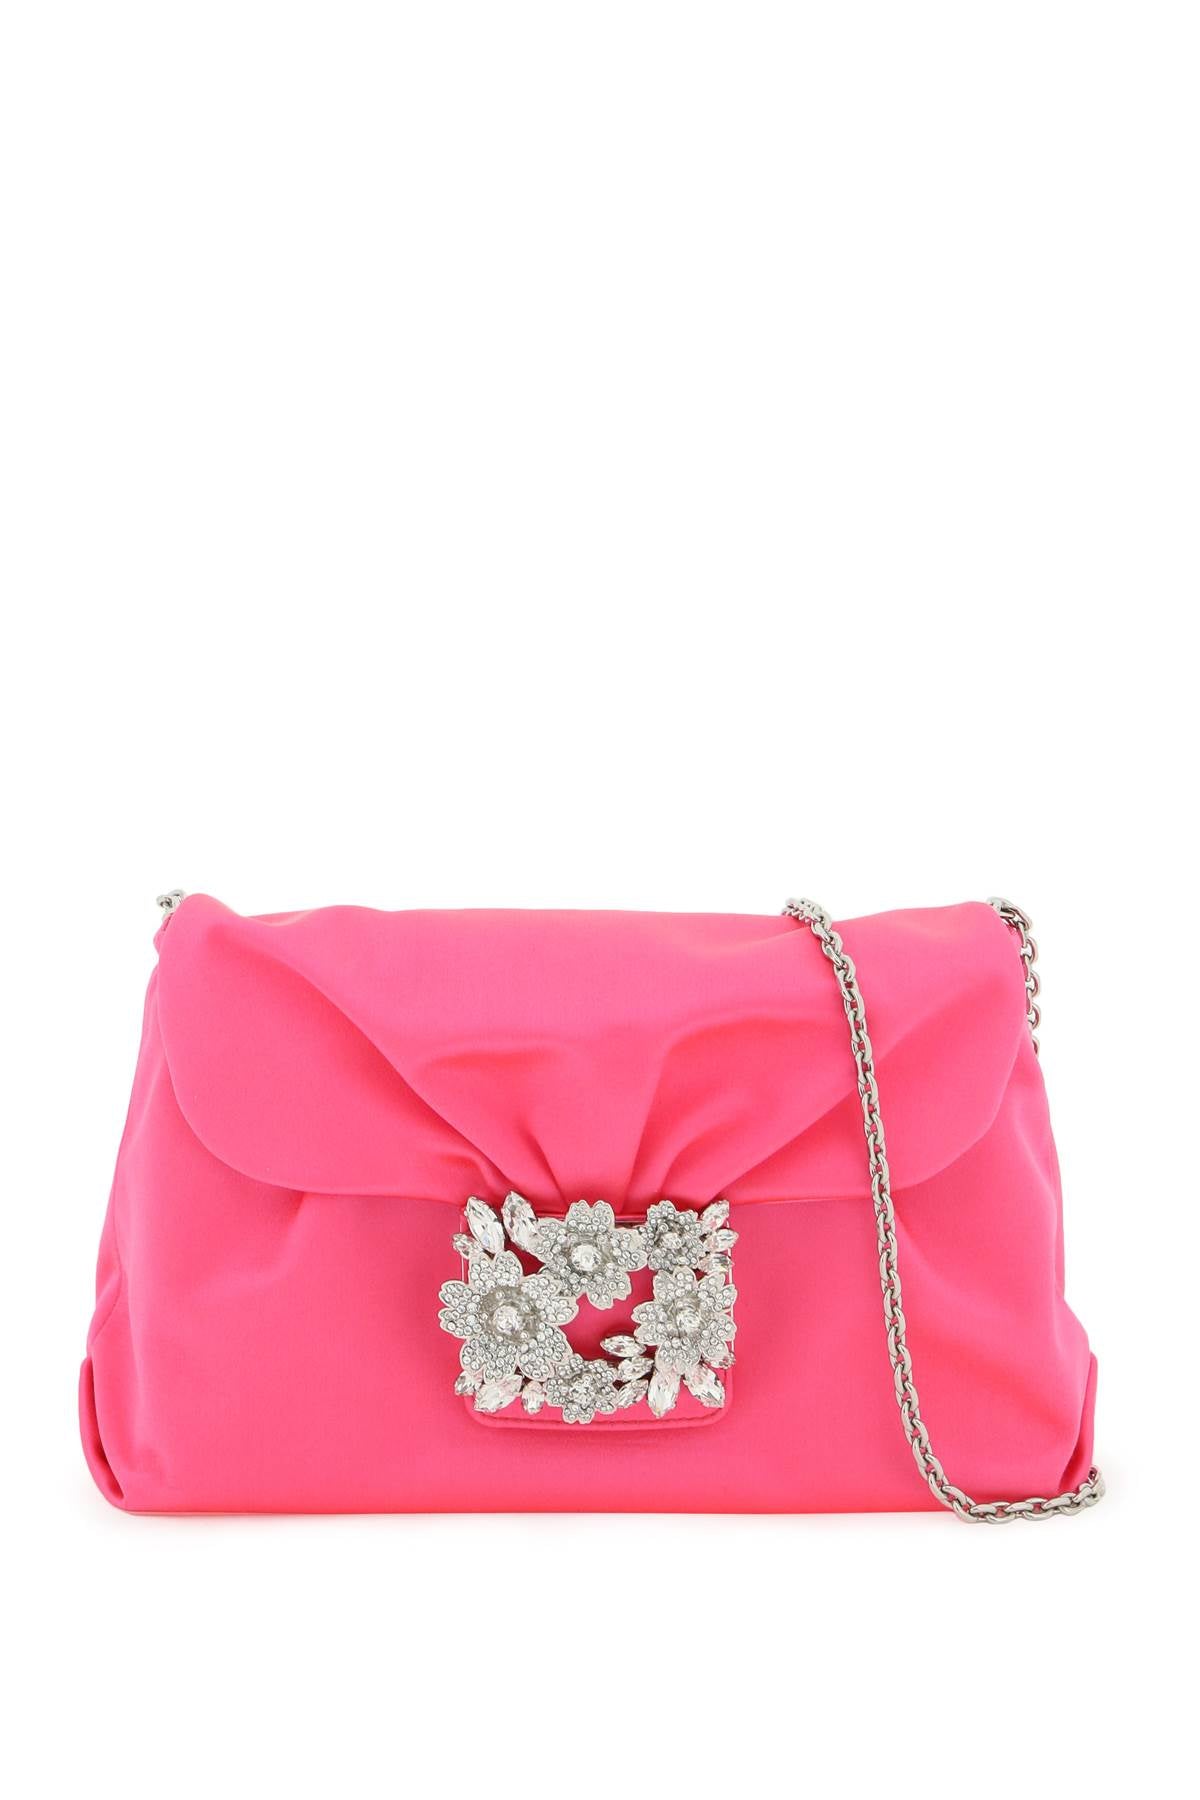 Feminine Pink Draped Mini Handbag for Women with Strass Buckle and Chain Strap